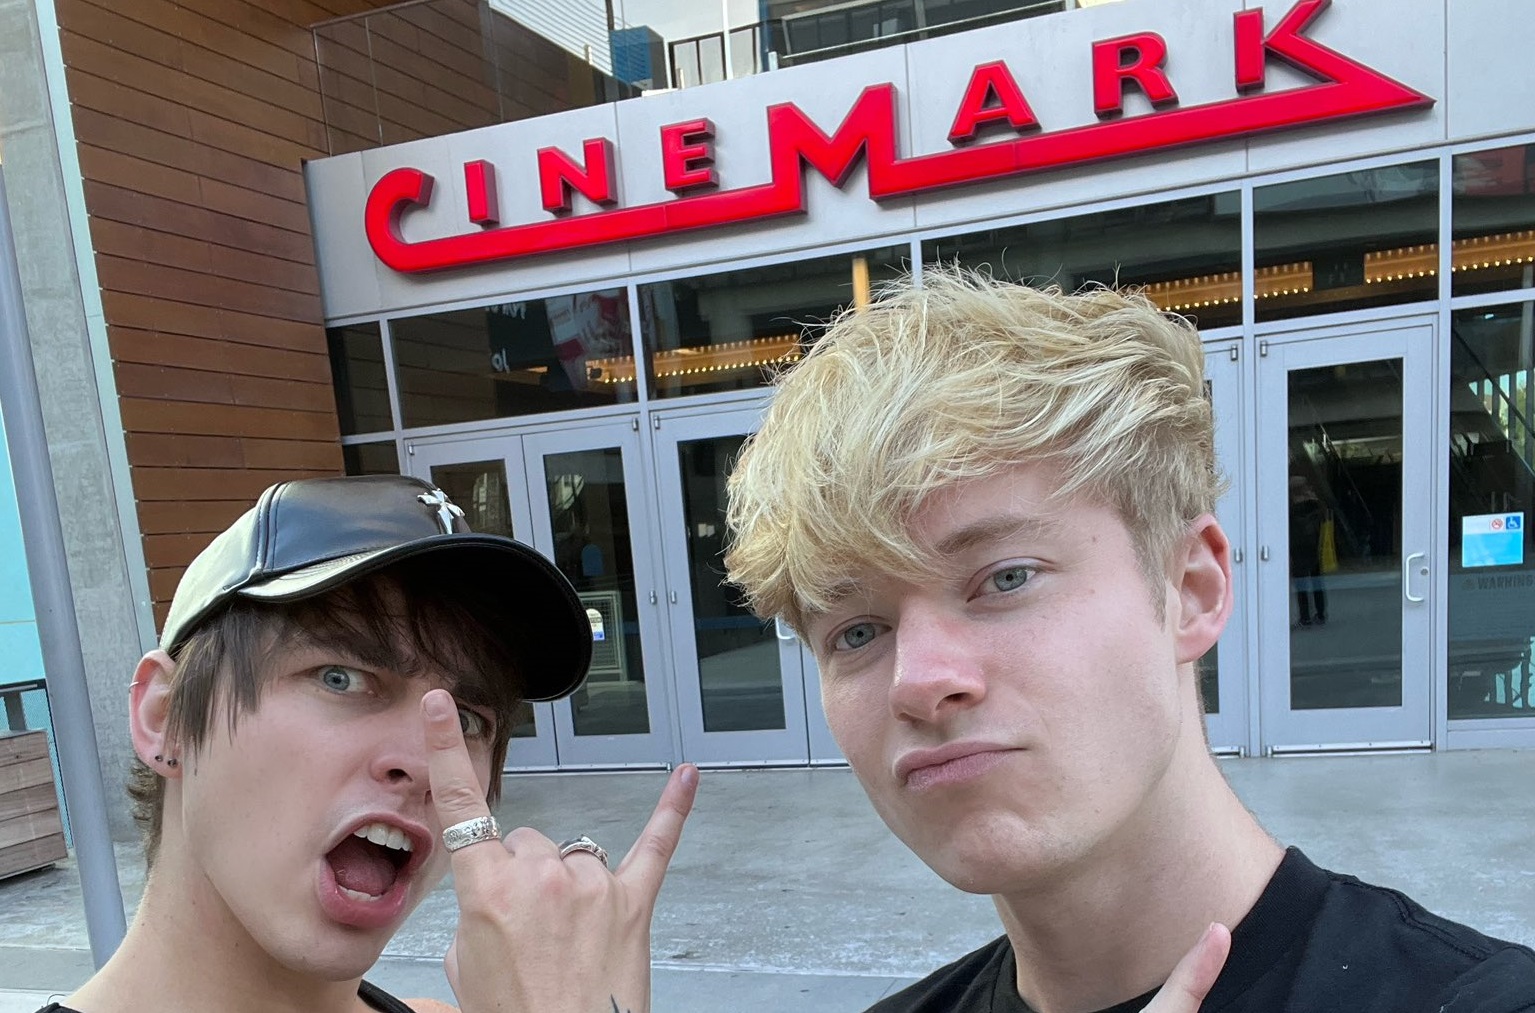 Sam and Colby's 'Conjuring' house return sells out at 168 movie theaters -  Tubefilter